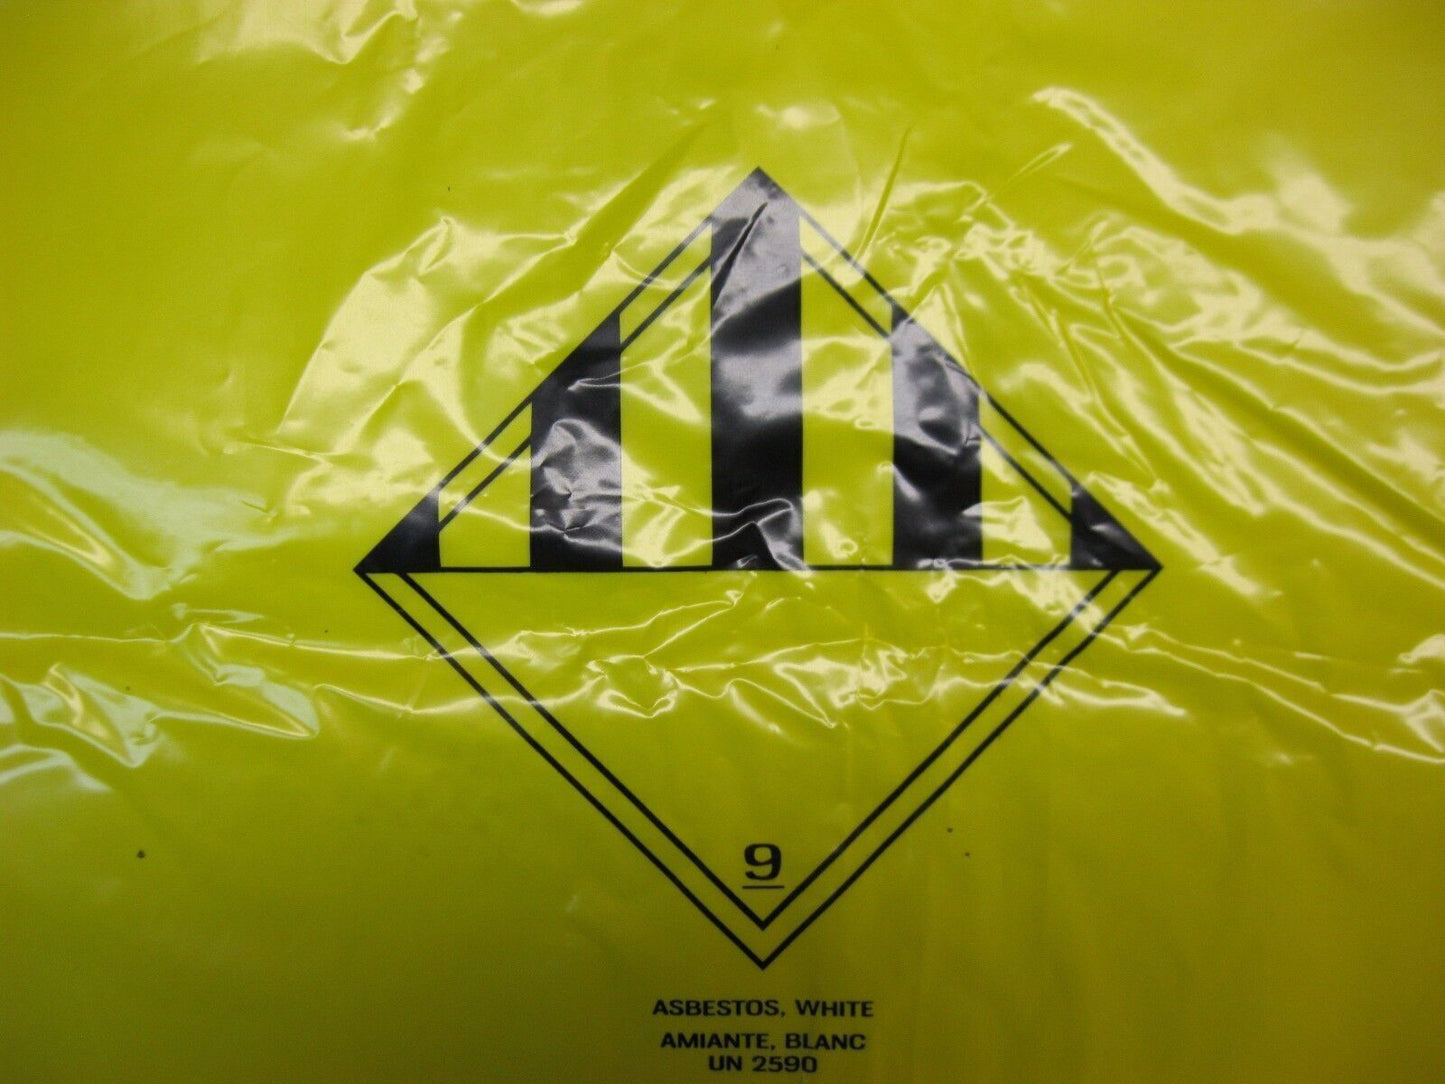 NEW 3MM YELLOW ASBESTOS DISPOSAL BAGS (PACK OF 50) 33" x 39-1/2" (84 X 101 cm)